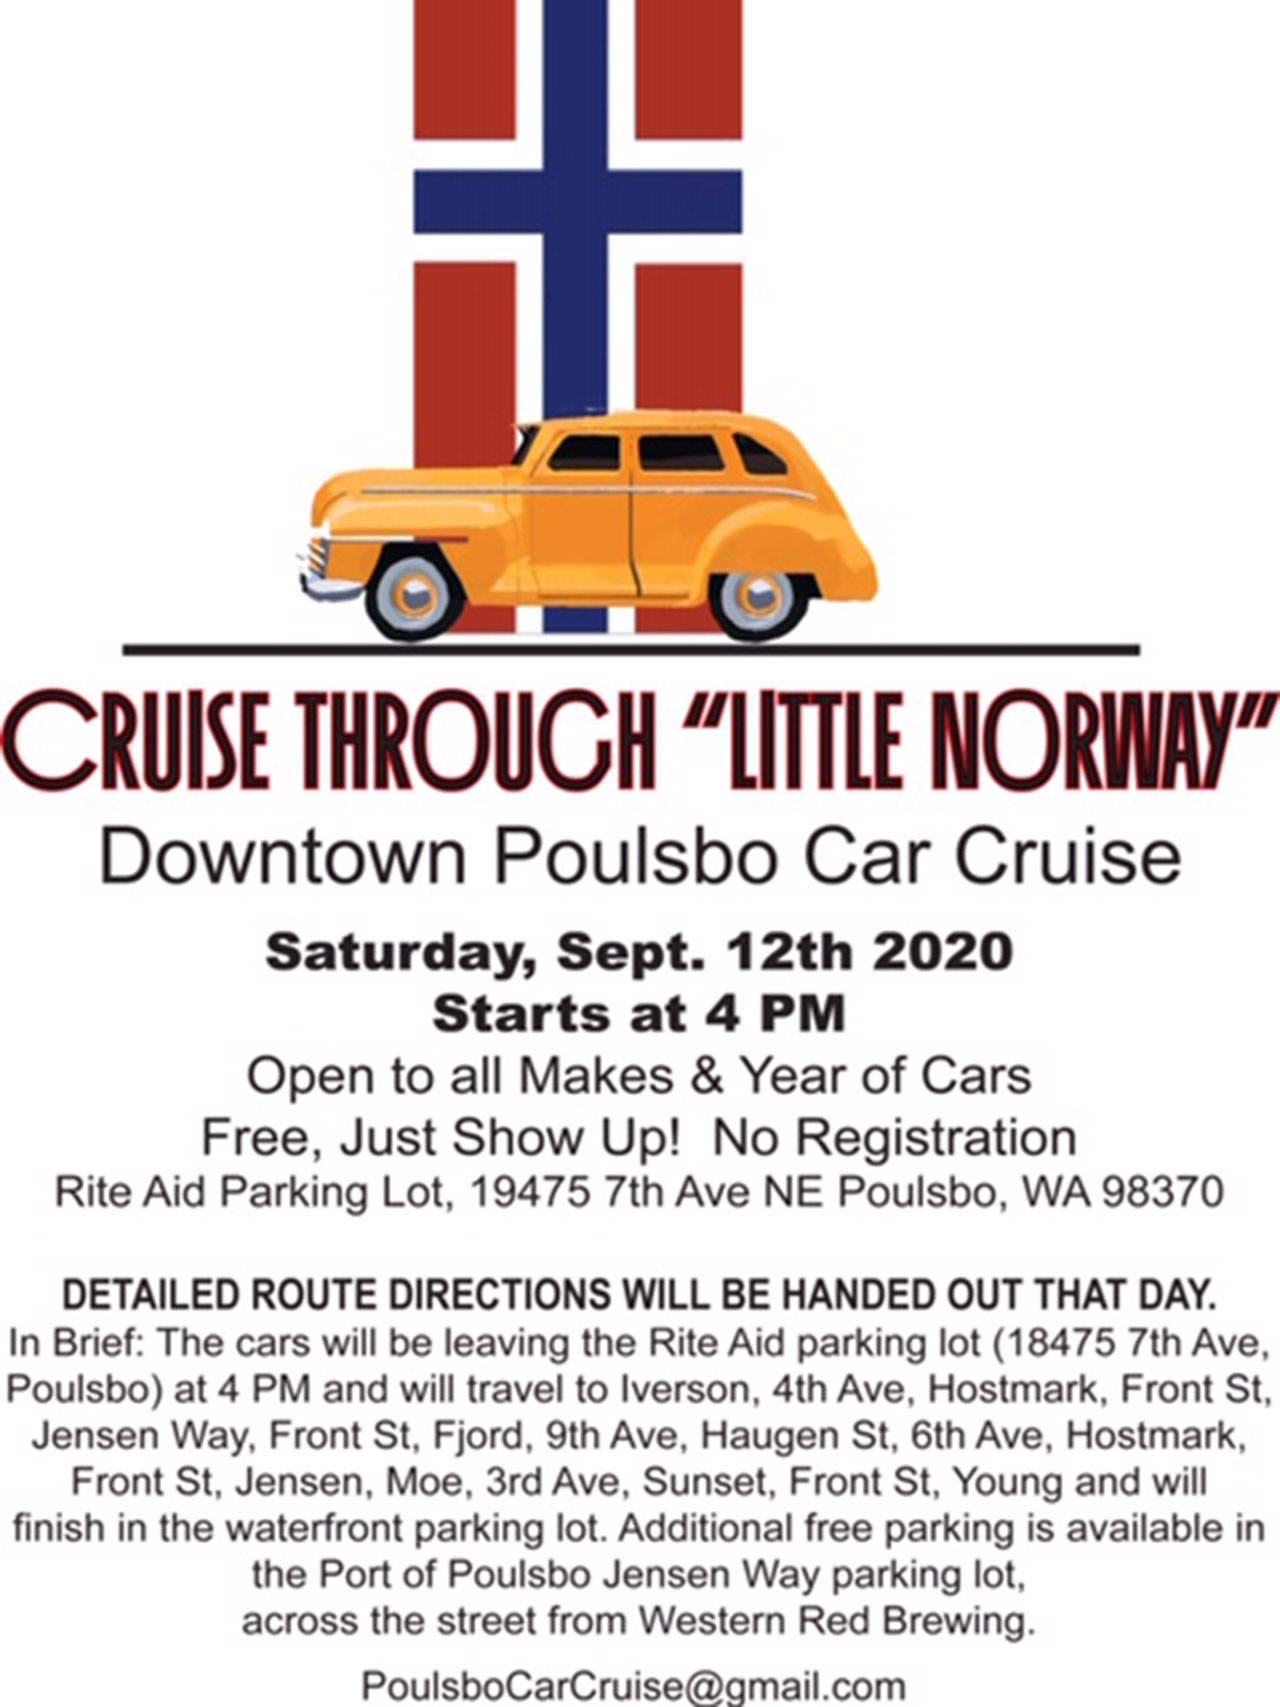 Cars to cruise through Little Norway Saturday